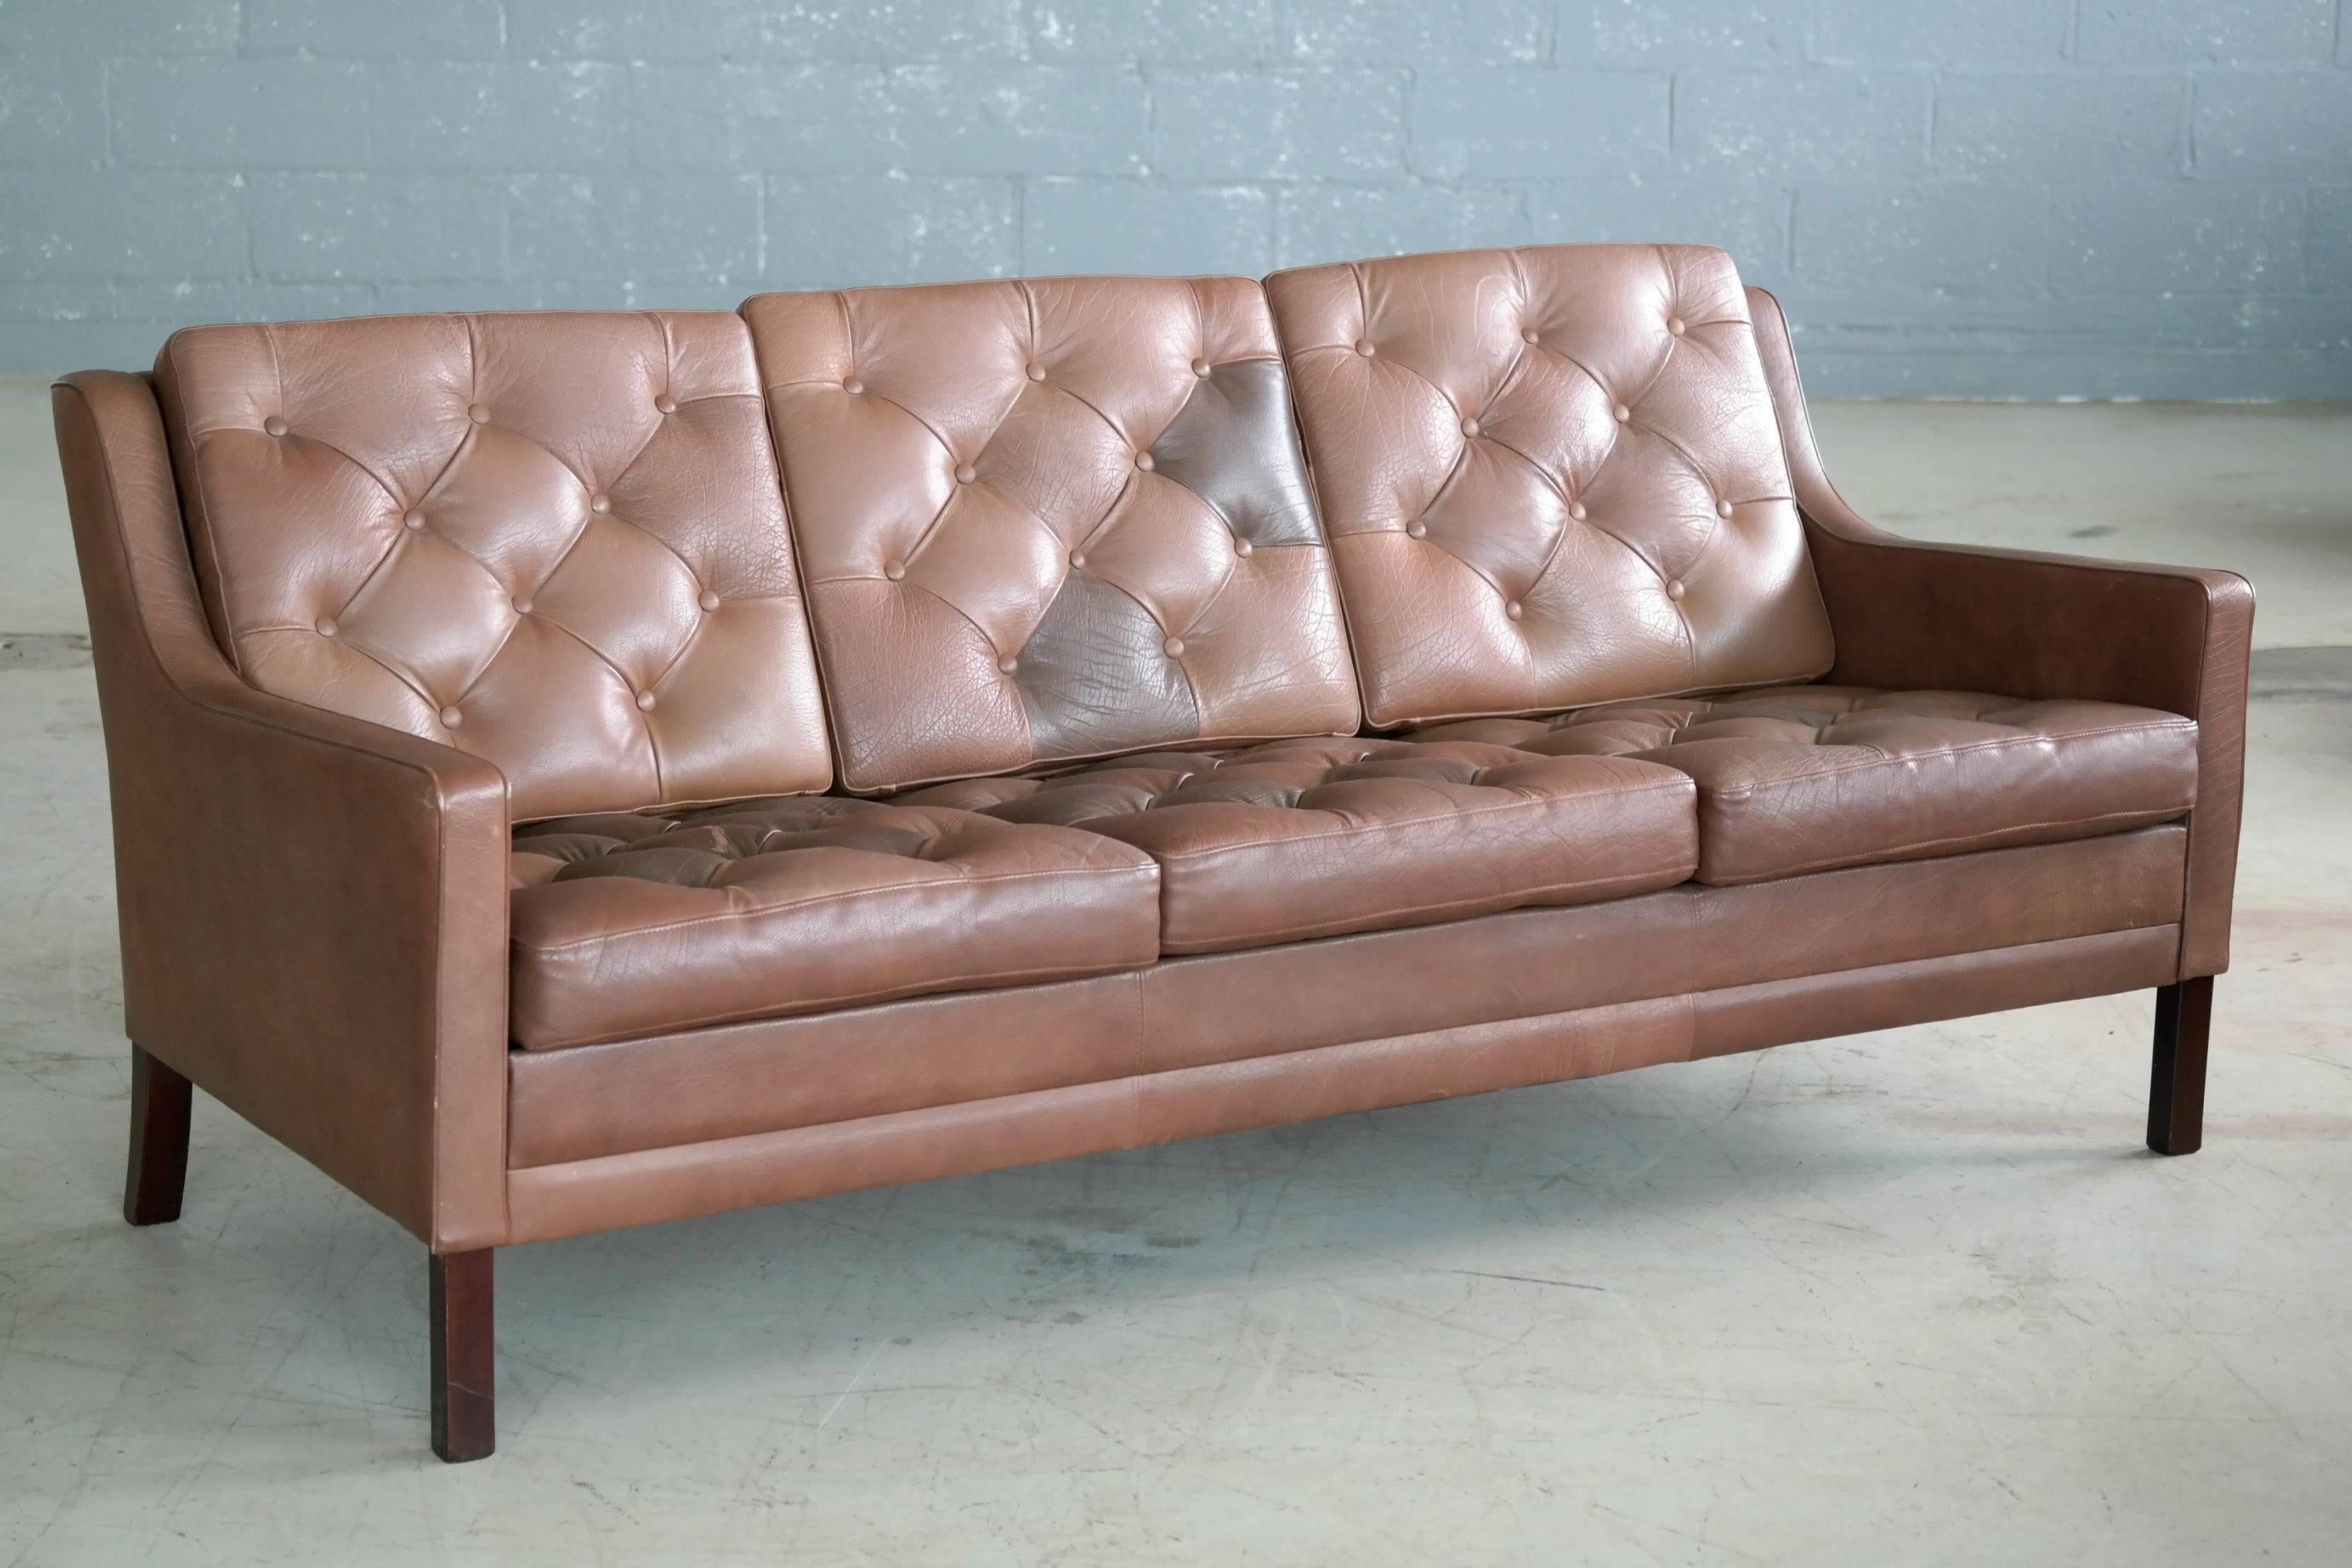 Mid-Century Modern 1960s Tufted Patchwork Leather Sofa by Ib Kofod-Larsen for OPE Mobler, Sweden